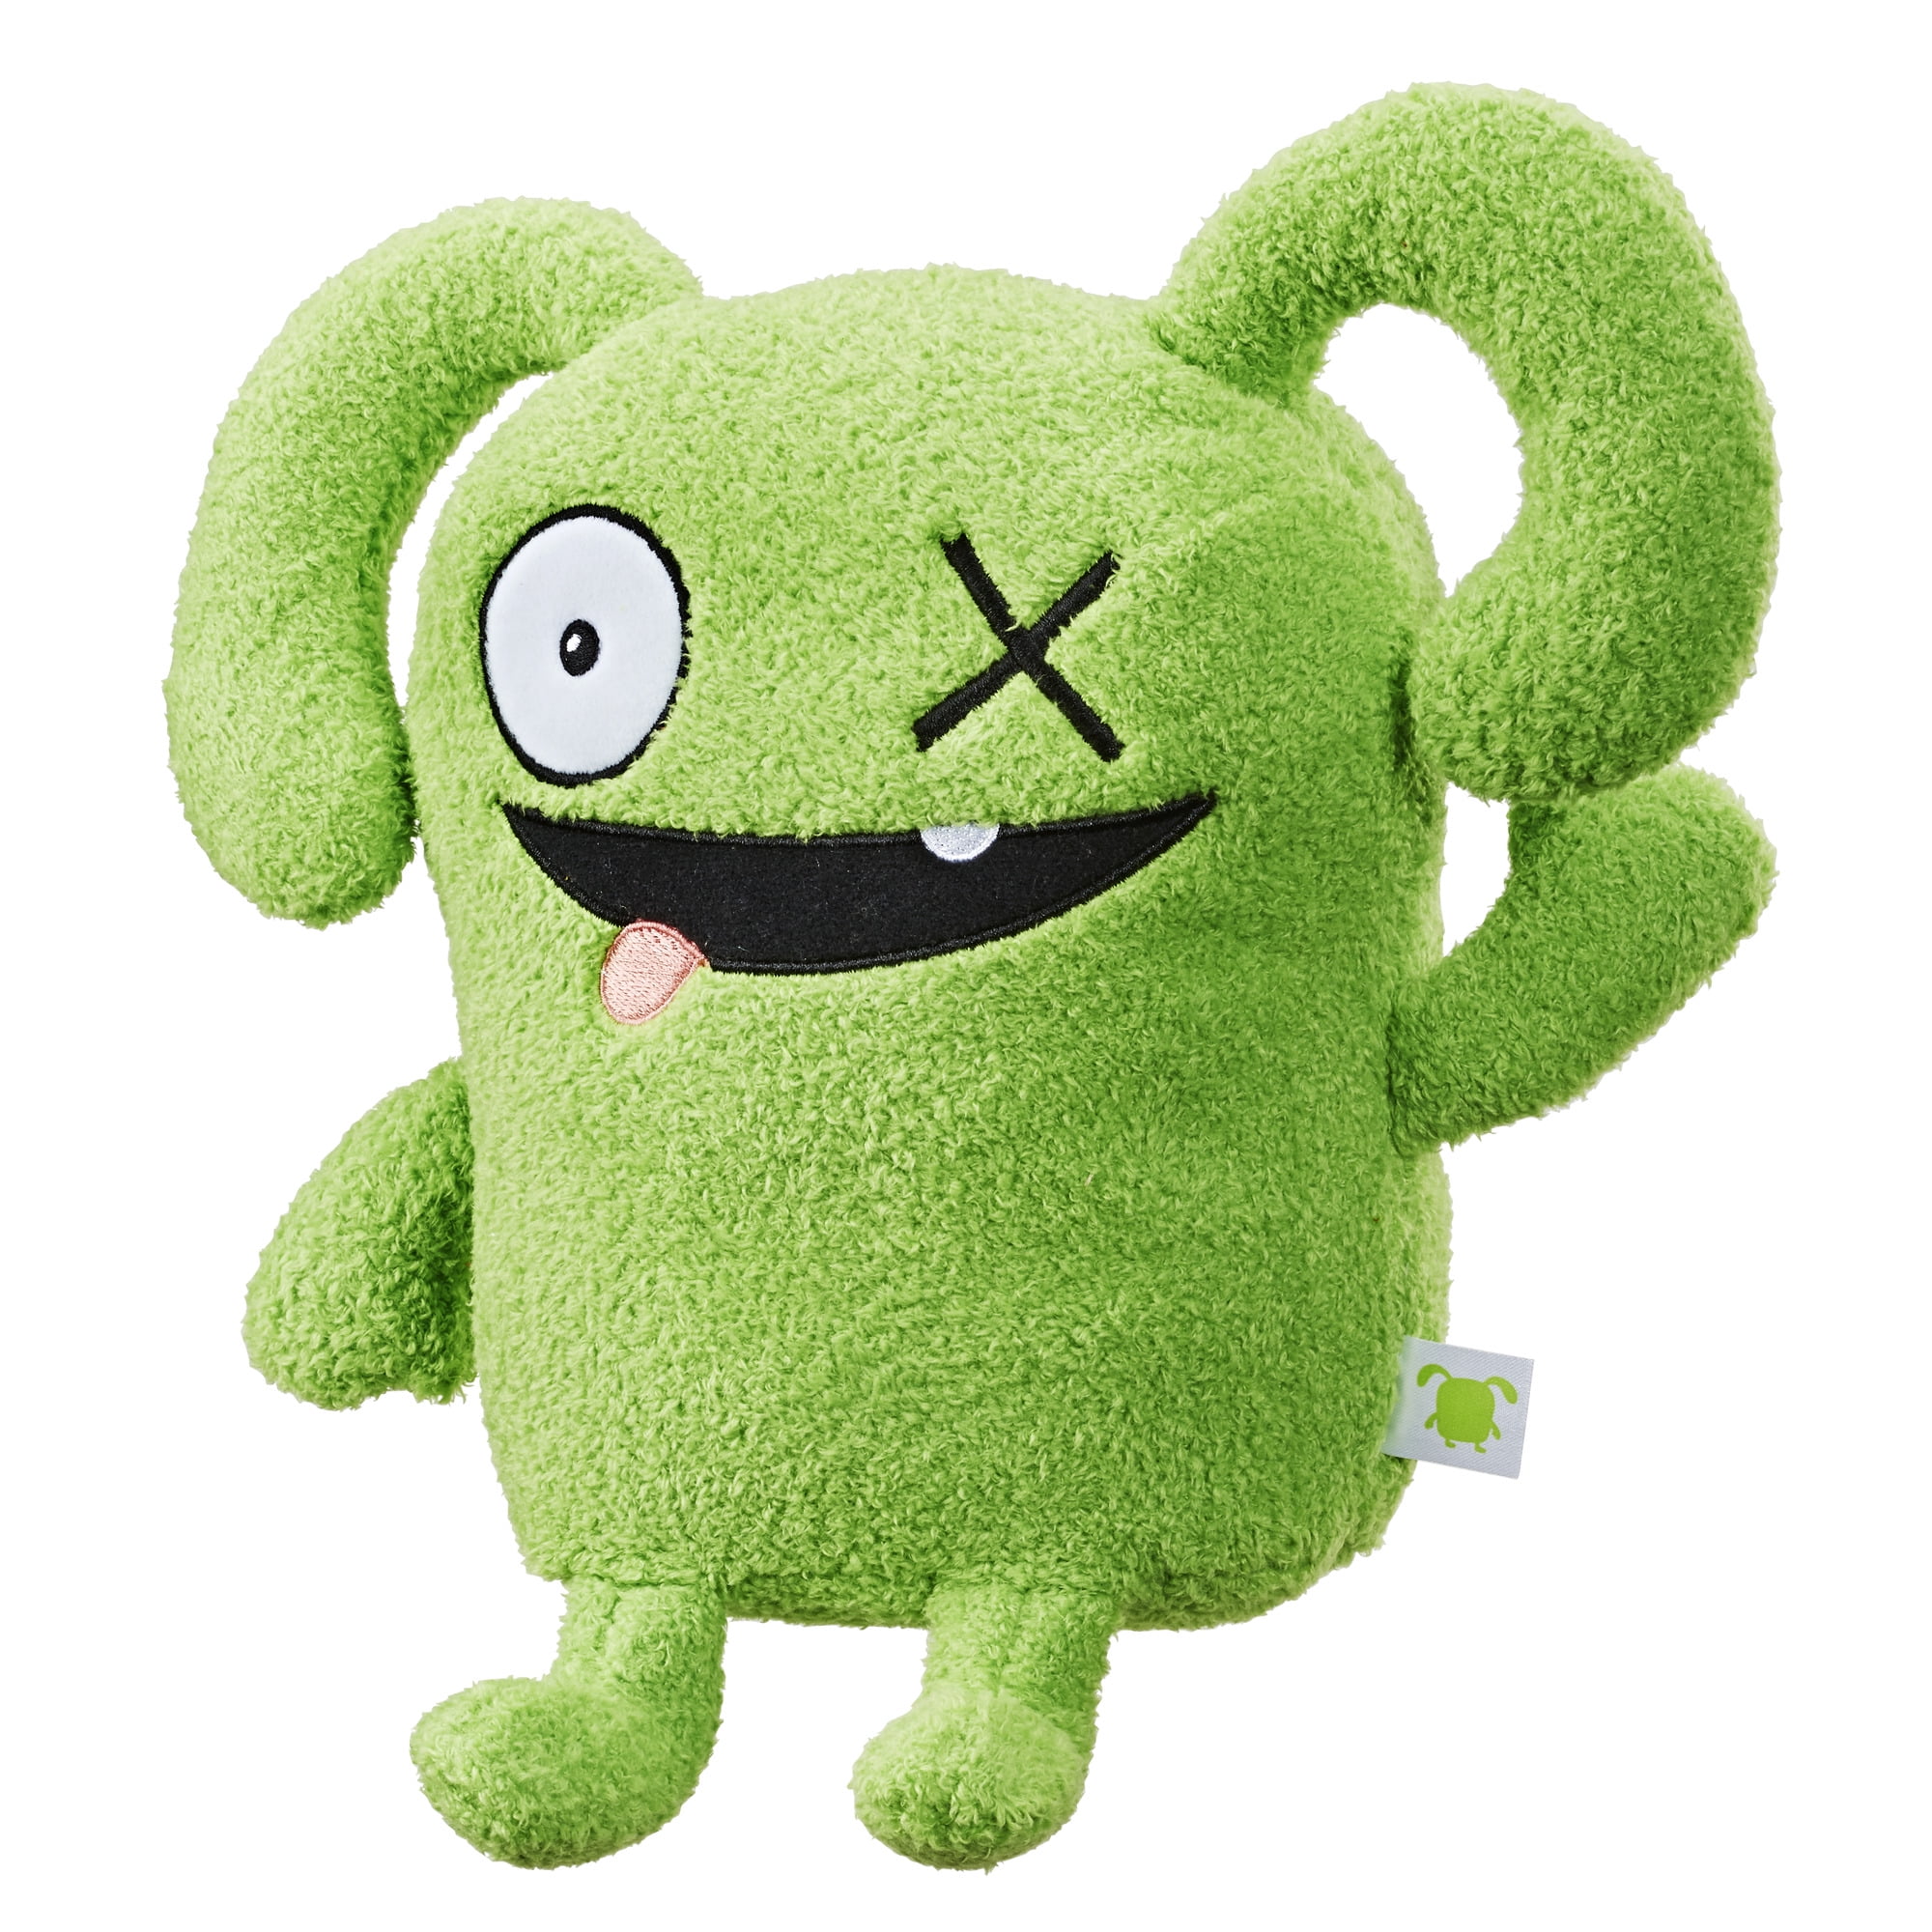 2019 Hasbro 9" Uglydolls Feature Sounds Ox 30 Sounds and Phrases New 